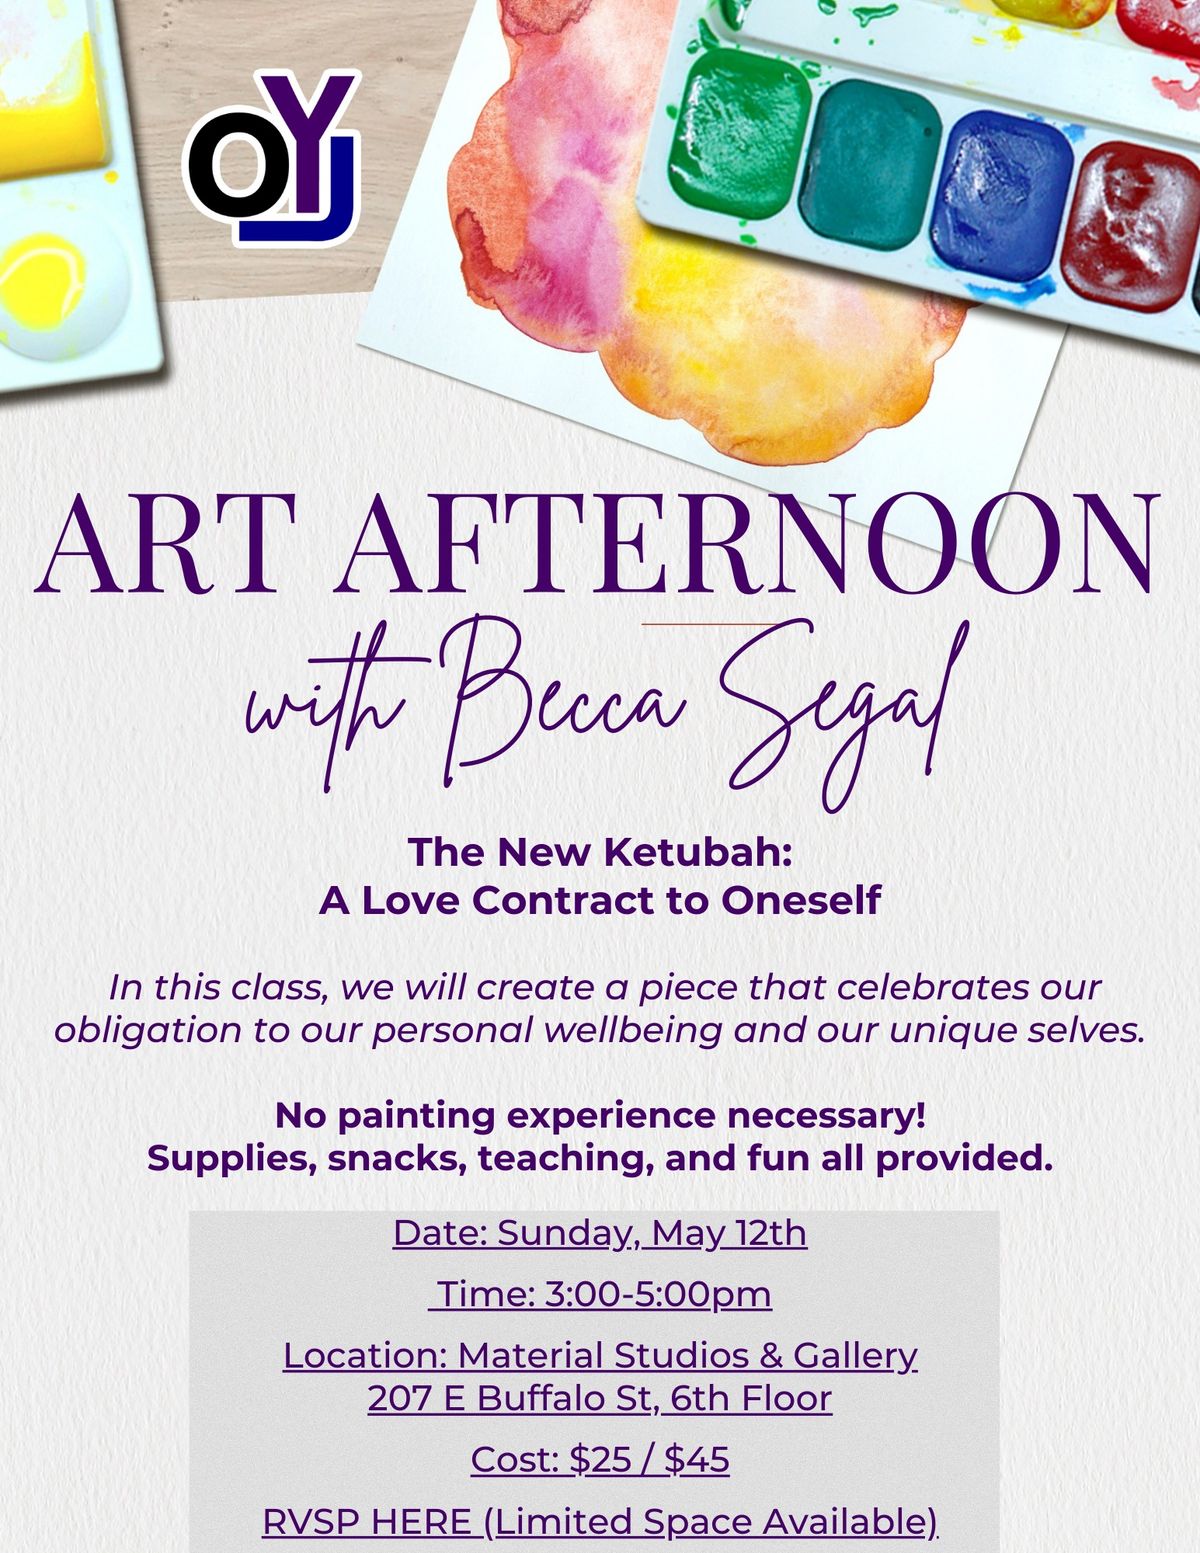 Art Afternoon with Becca Segal